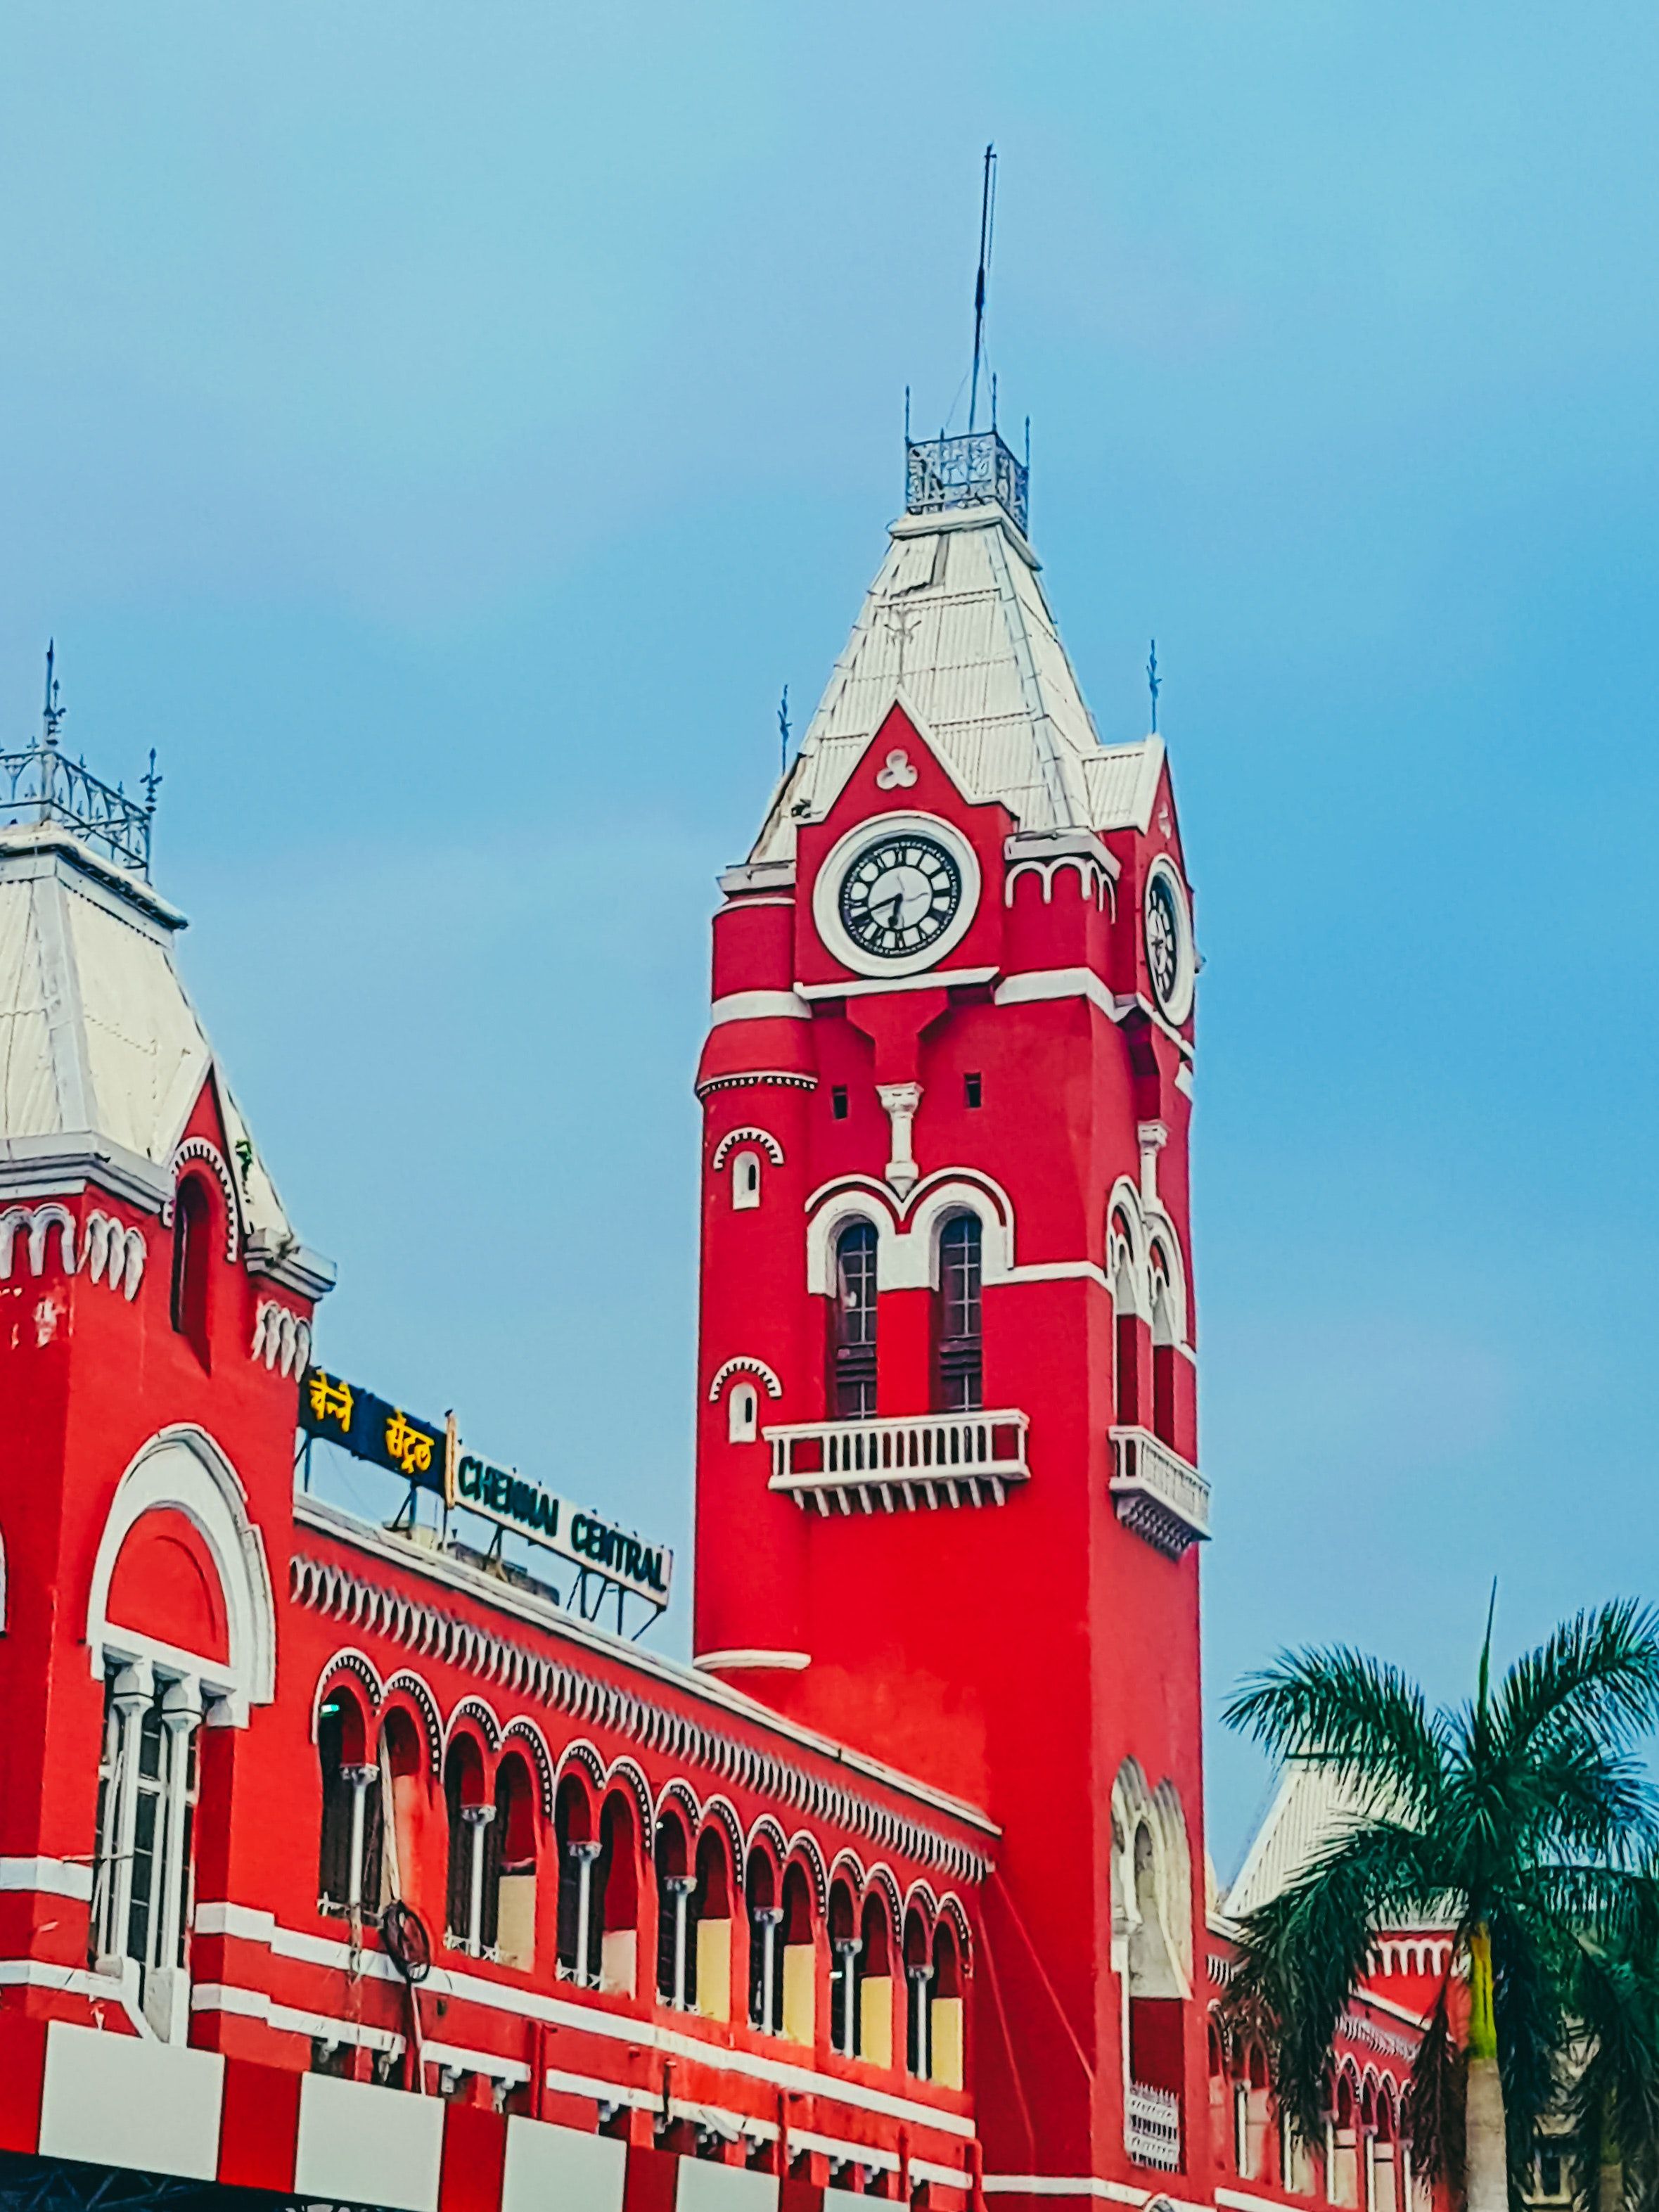 Chennai Central Station Image Download